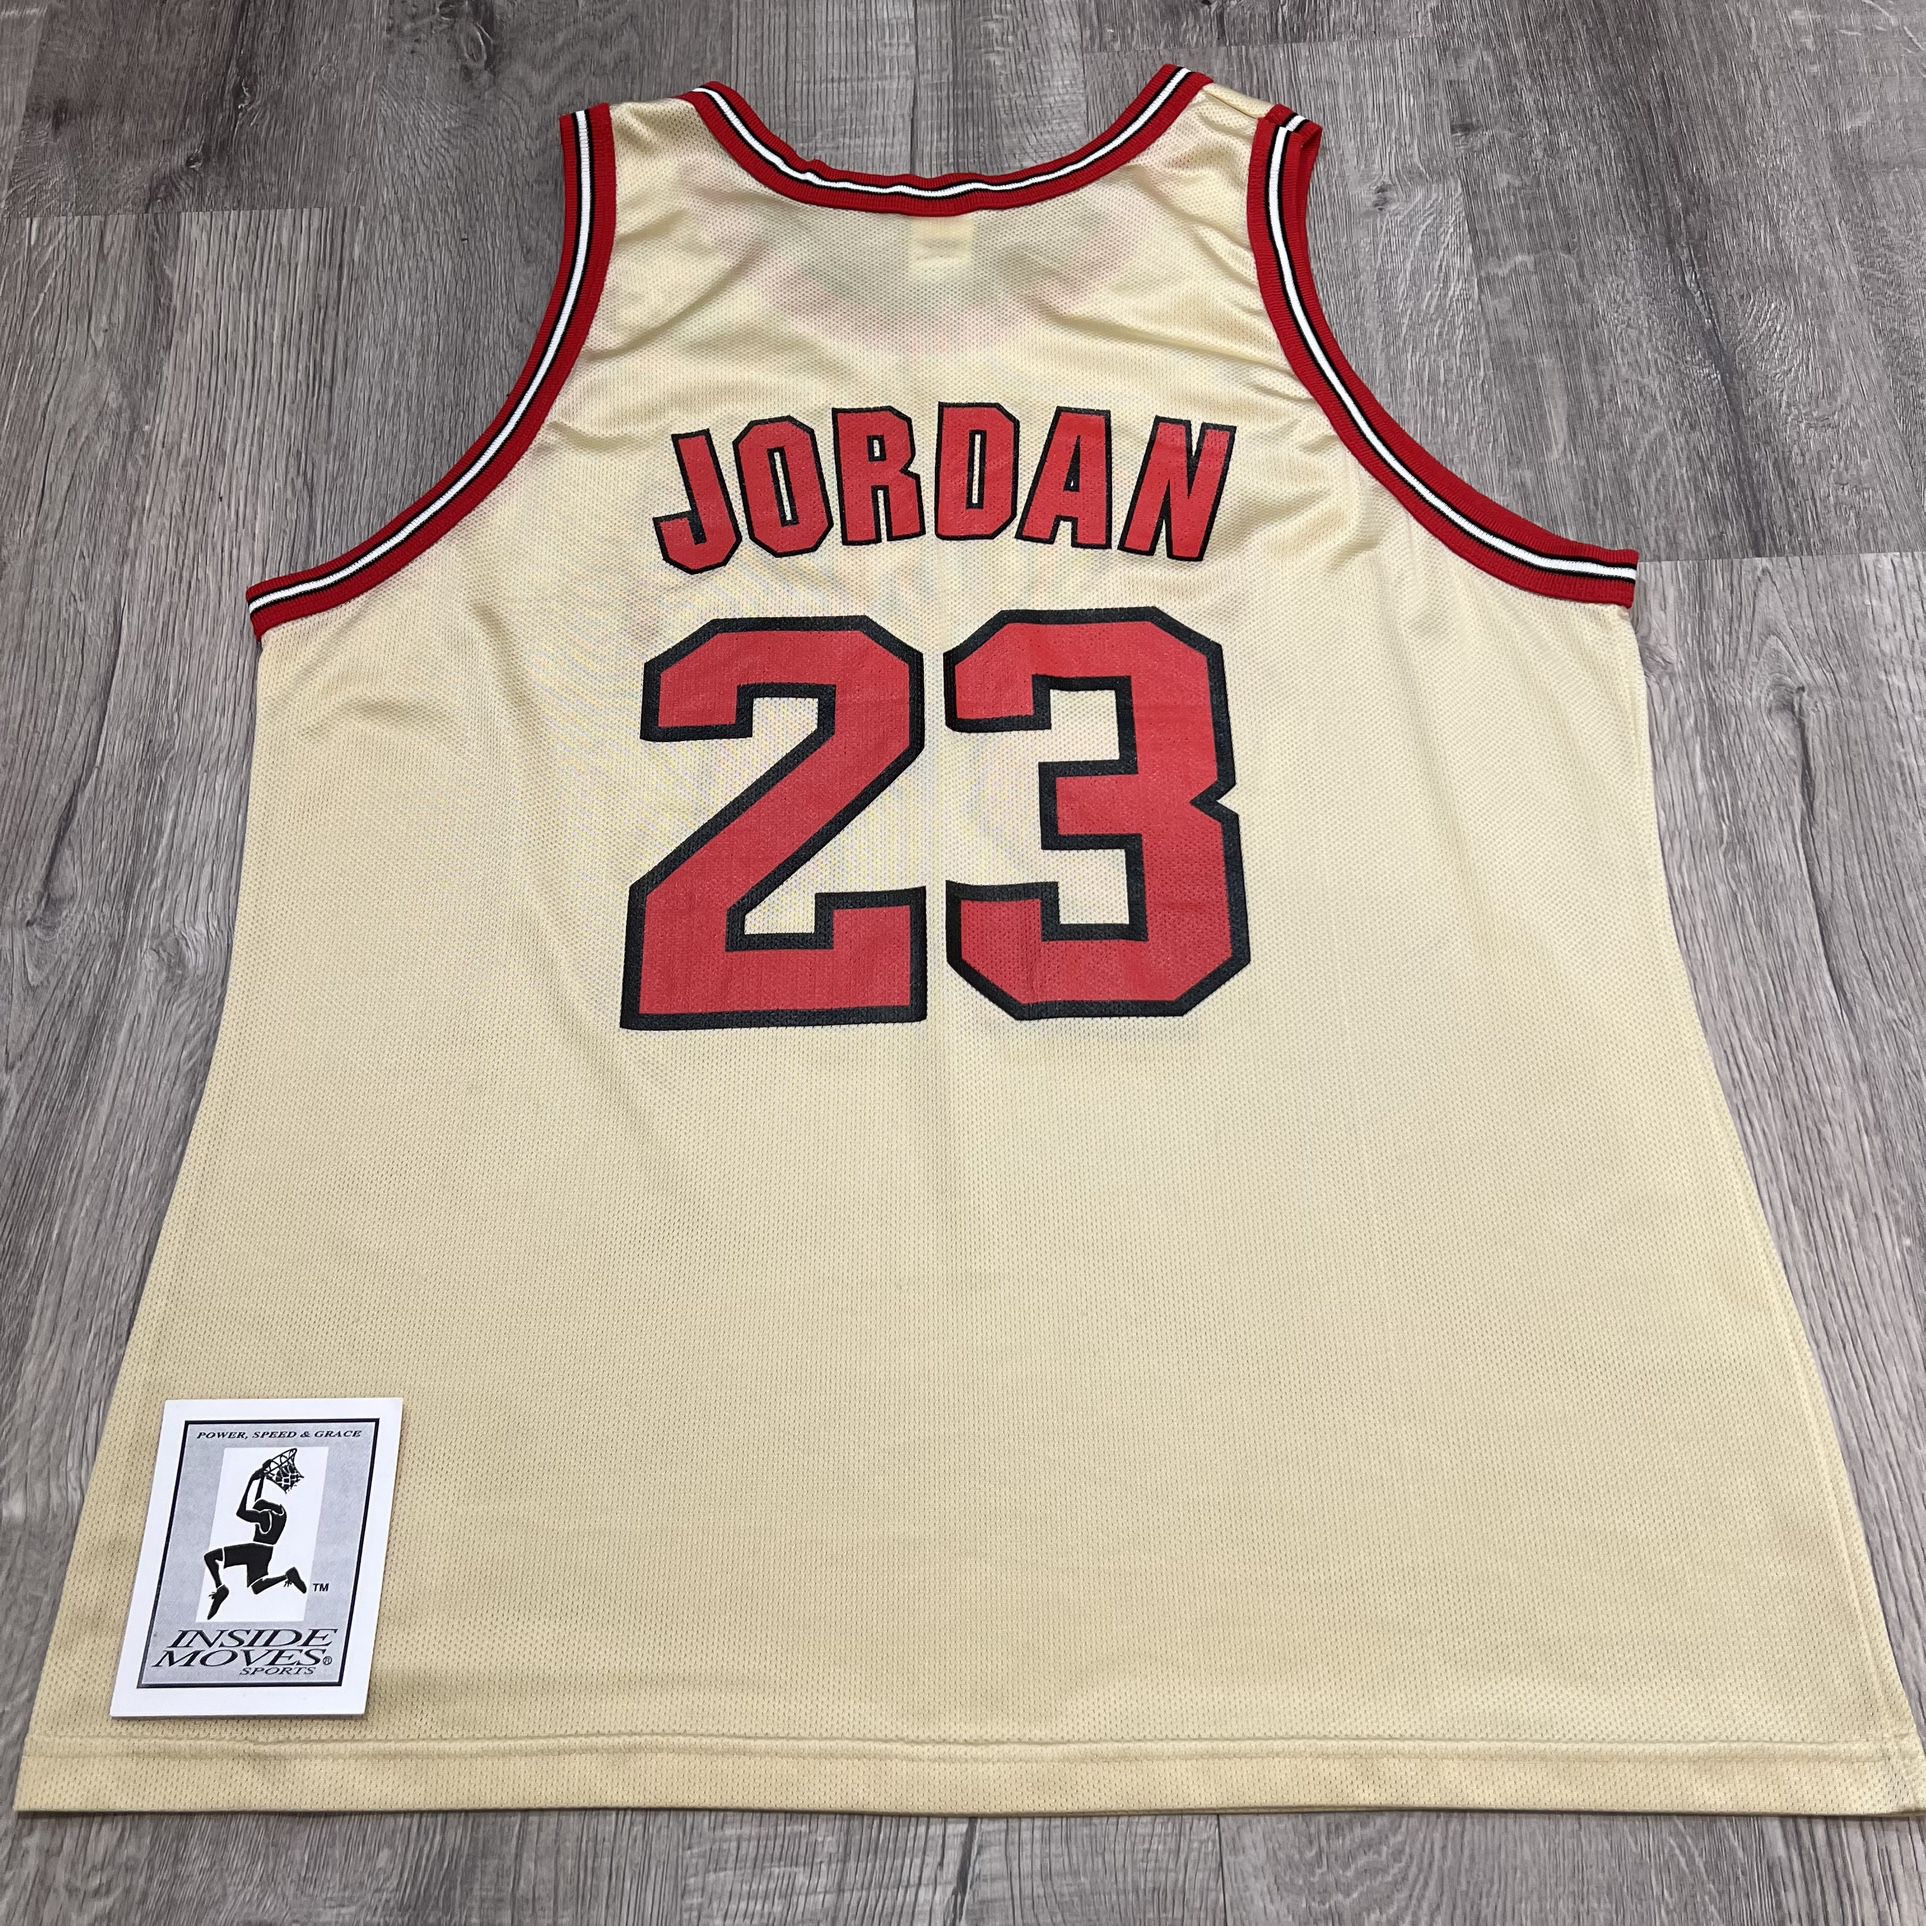 9 Nba Classic champion jerseys for Sale in Peoria, AZ - OfferUp